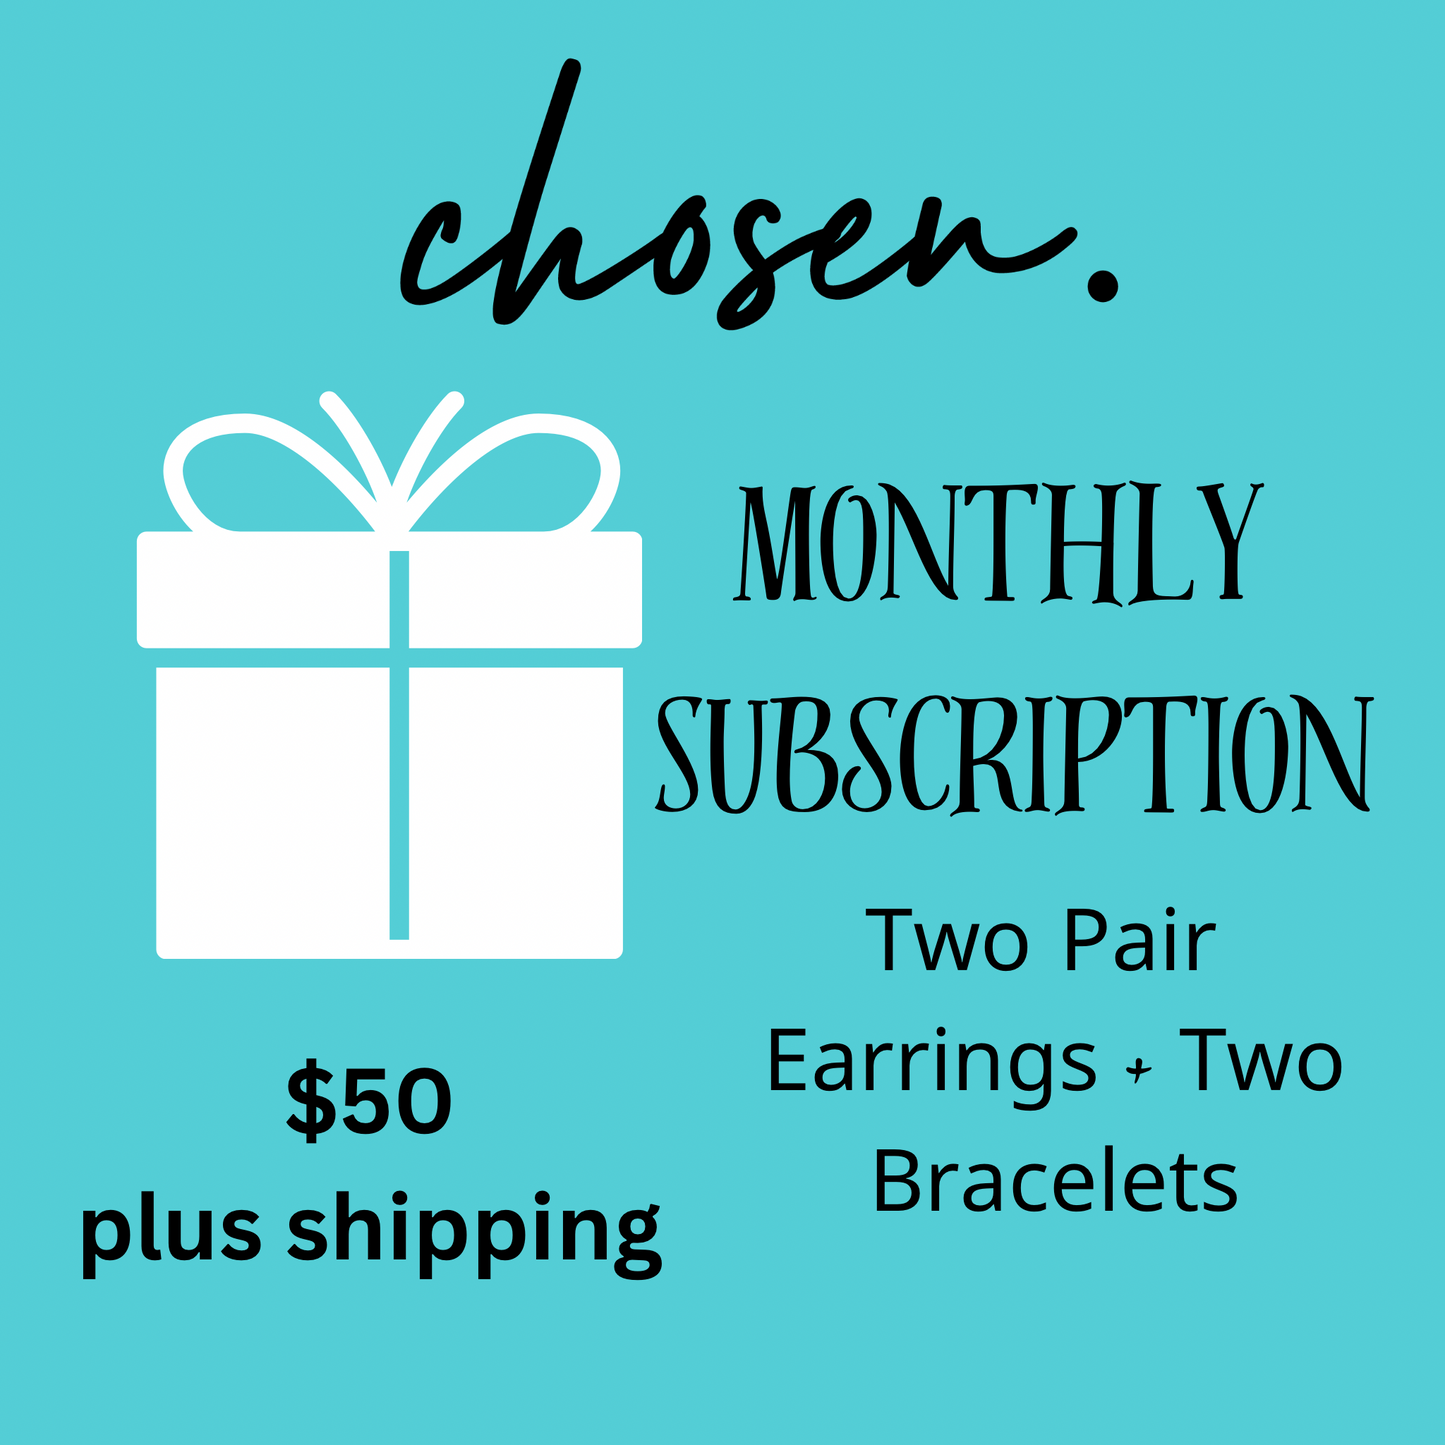 Monthly 2 Pair Earrings and 2 Bracelets Subscription